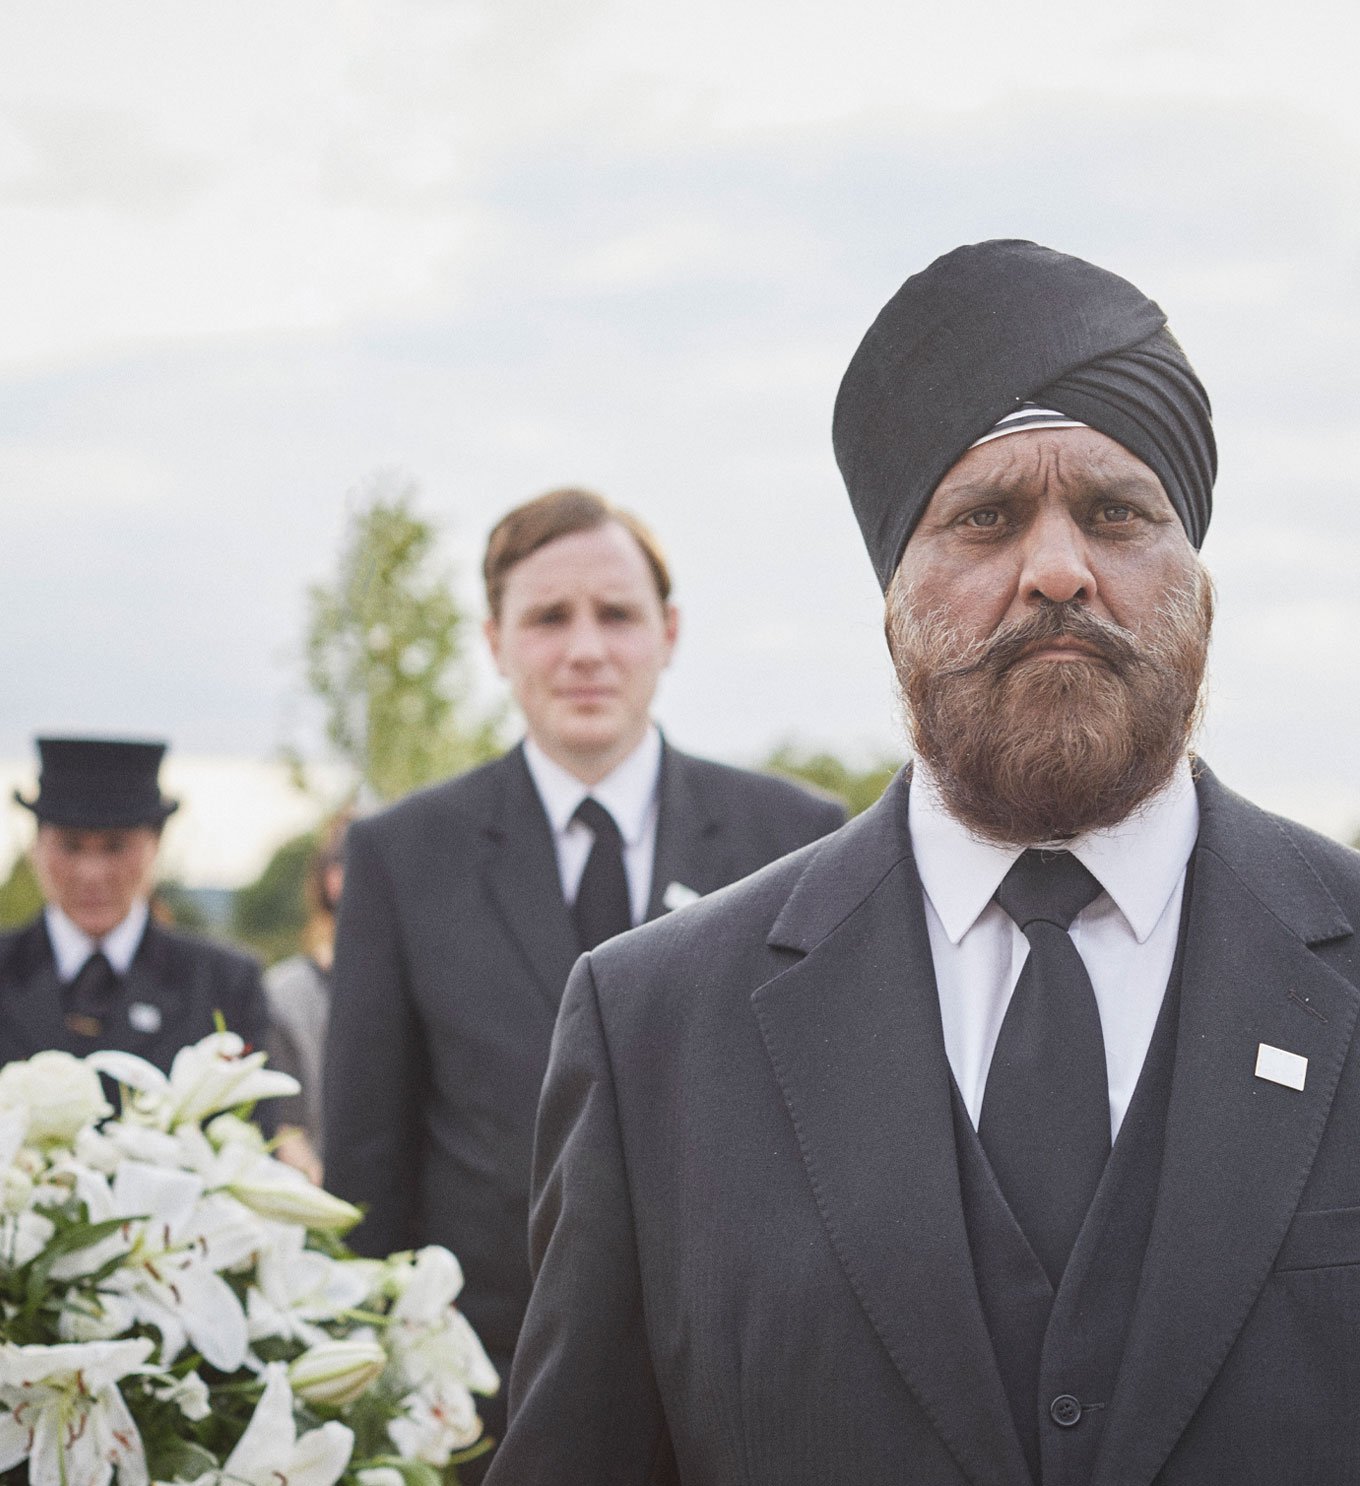 A Sikh funeral director wearing a turban helps to bear a coffin for a traditional funeral